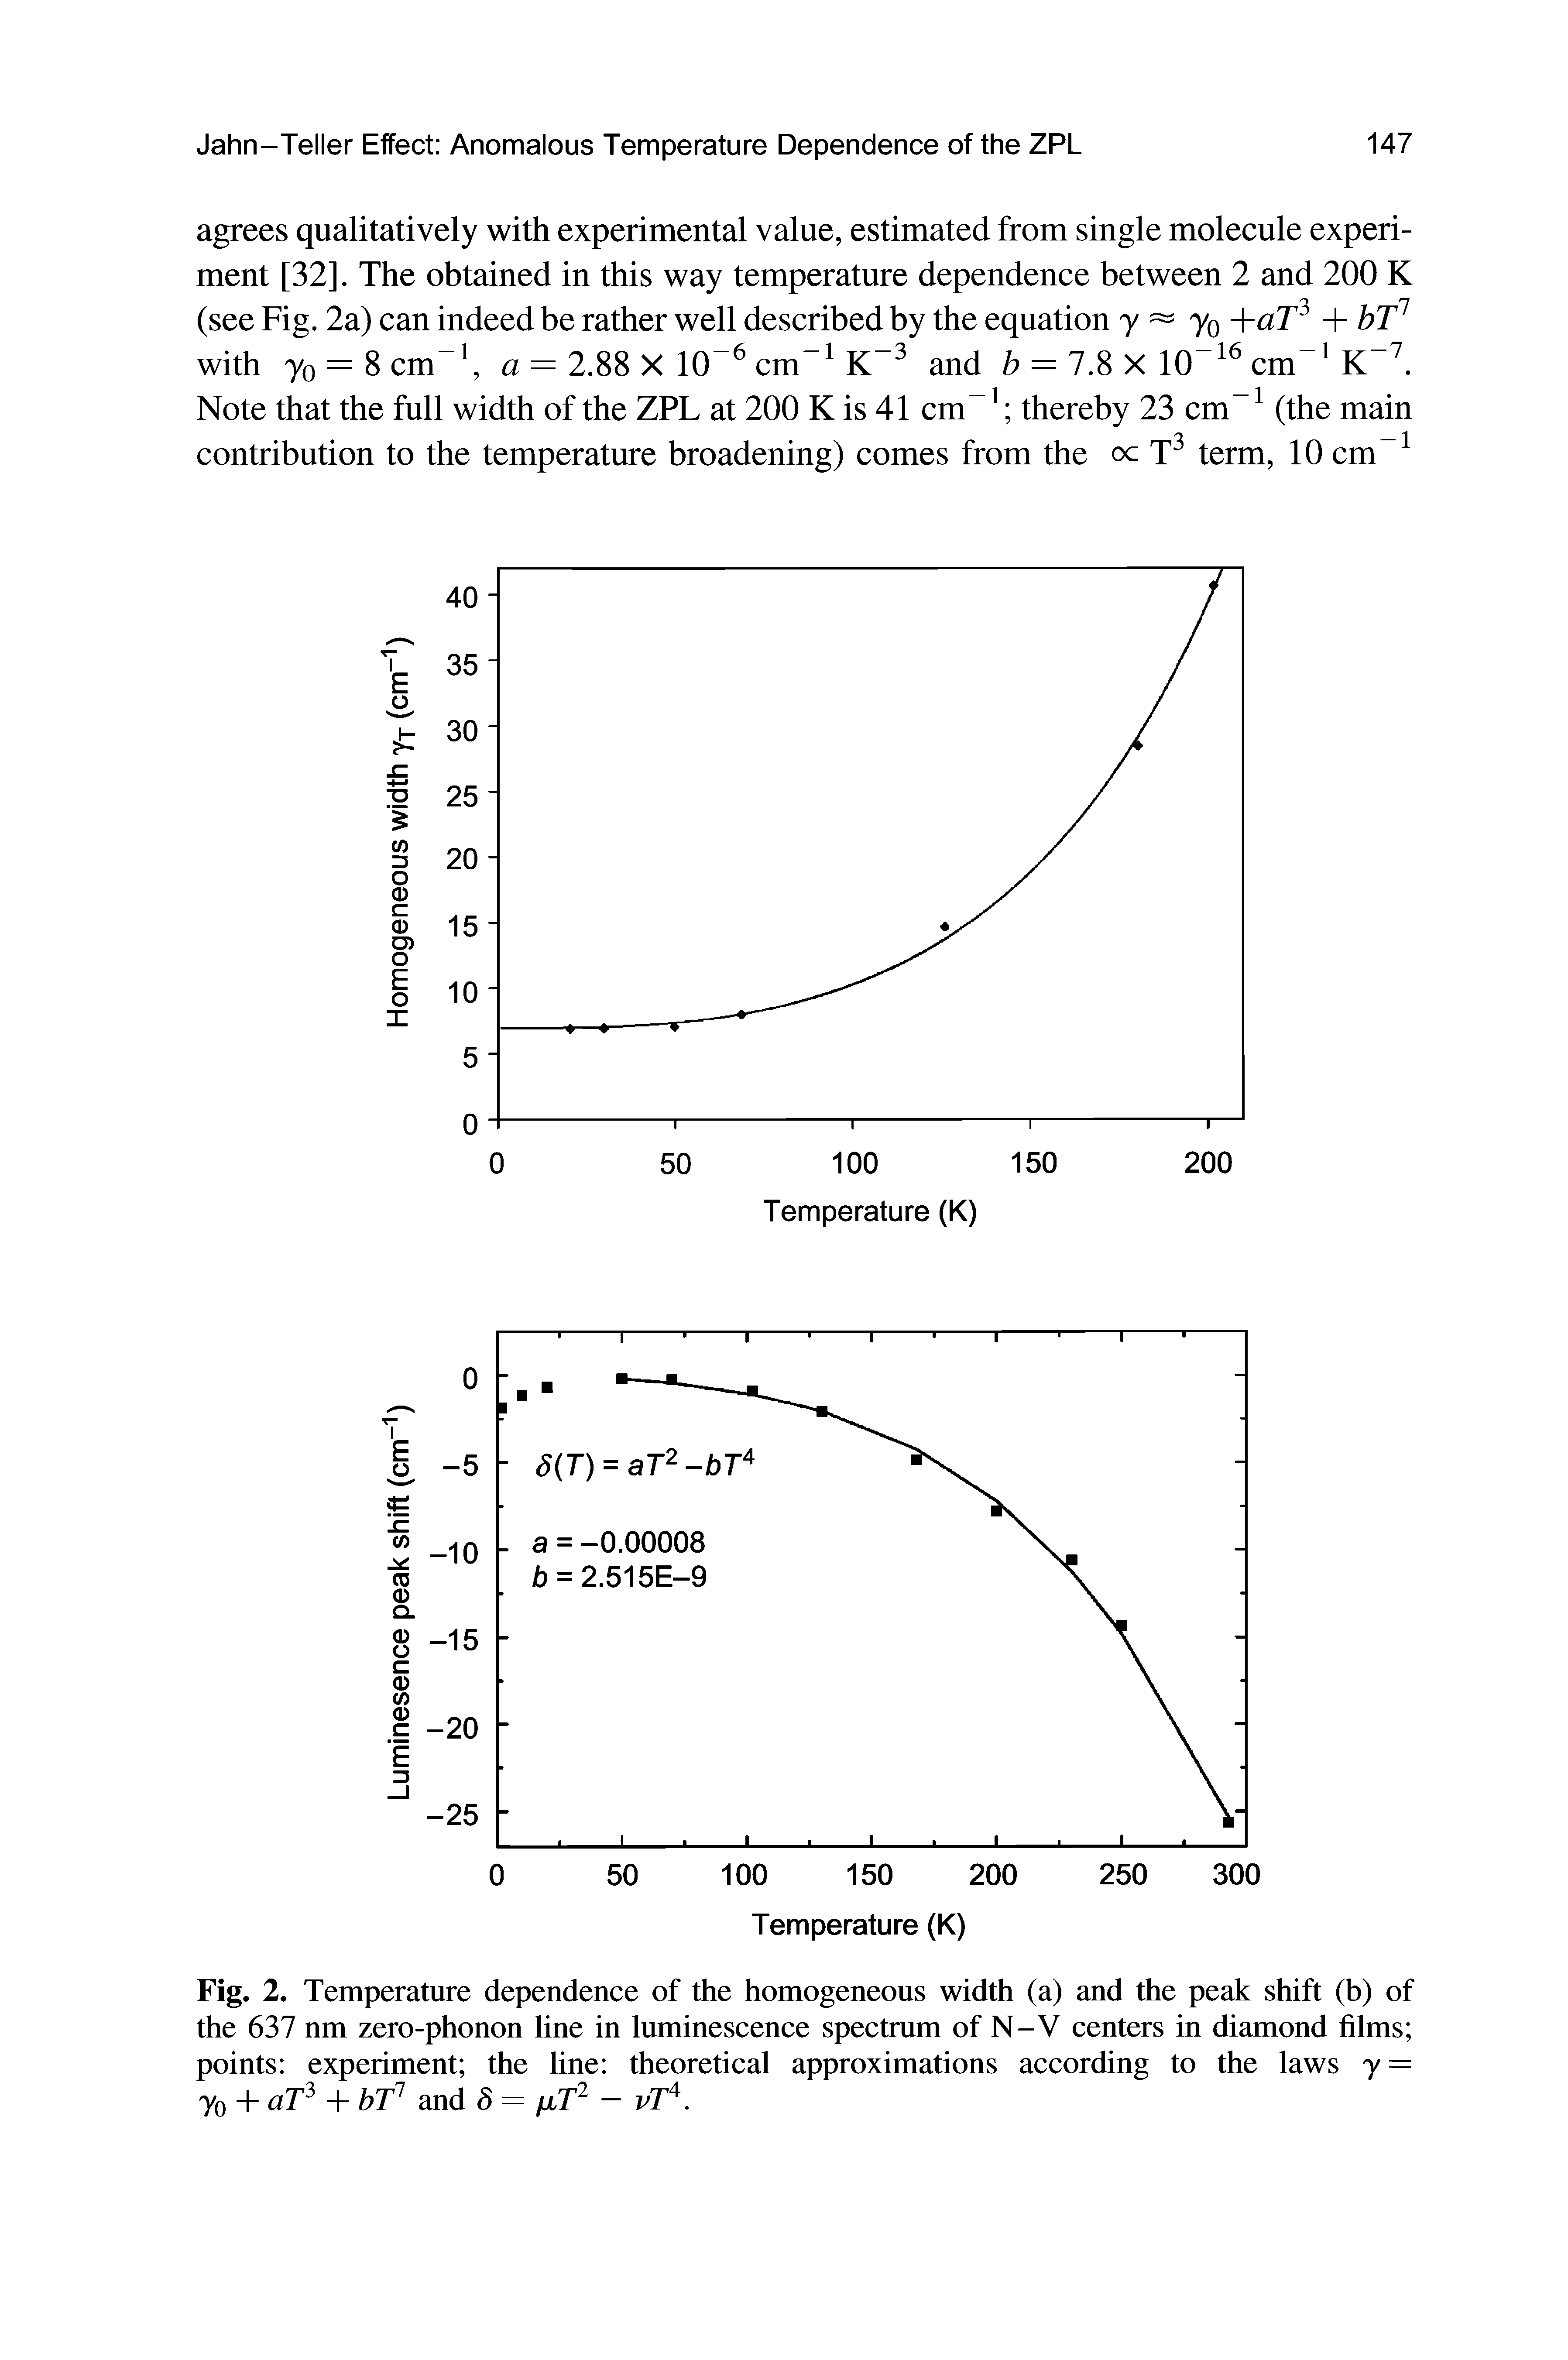 Fig. 2. Temperature dependence of the homogeneous width (a) and the peak shift (b) of the 637 nm zero-phonon line in luminescence spectrum of N-V centers in diamond films points experiment the line theoretical approximations according to the laws y — y0 + aT3 + bT1 and 8 = fiT2 - vT4.